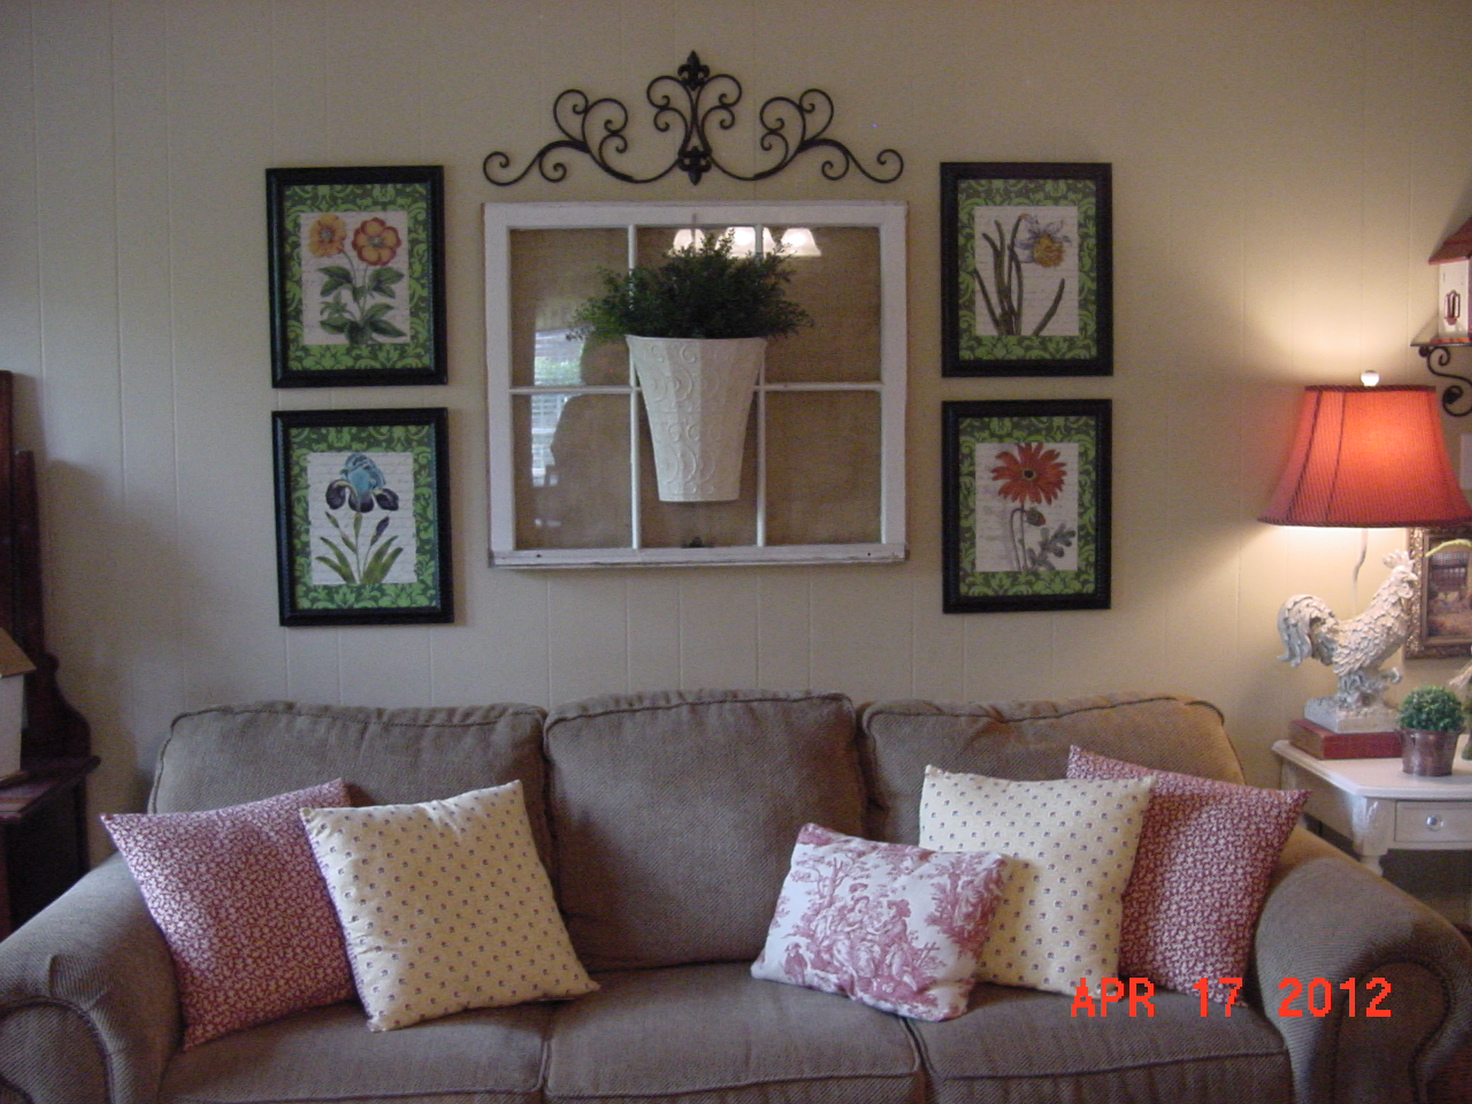 The Happy Homebody: New Wall Arrangement above Couch